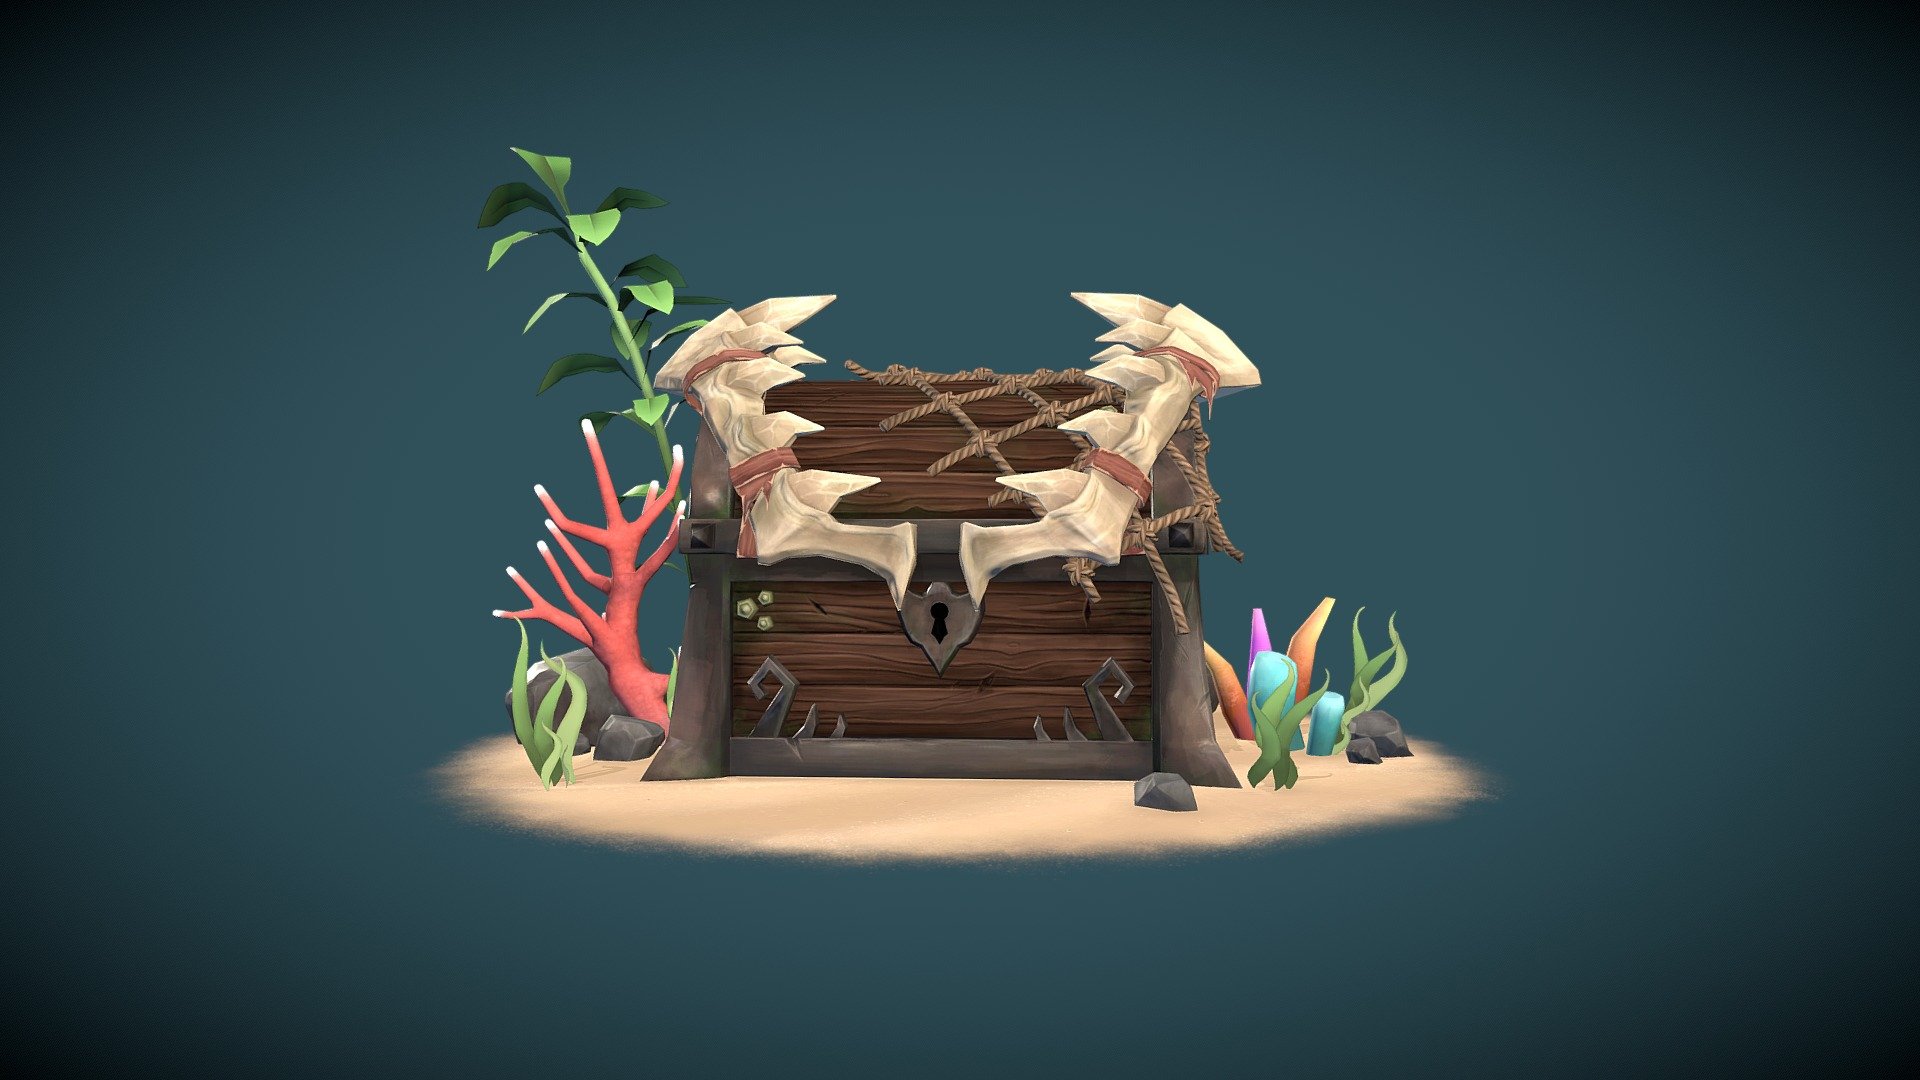 This original, handpainted, stylised treasure chest was modeled in blender, sculpted in zbrush and hand painted in substance painter.

The design is inspired by the treasure chests and corals seen in Sea of Theives the game 3d model